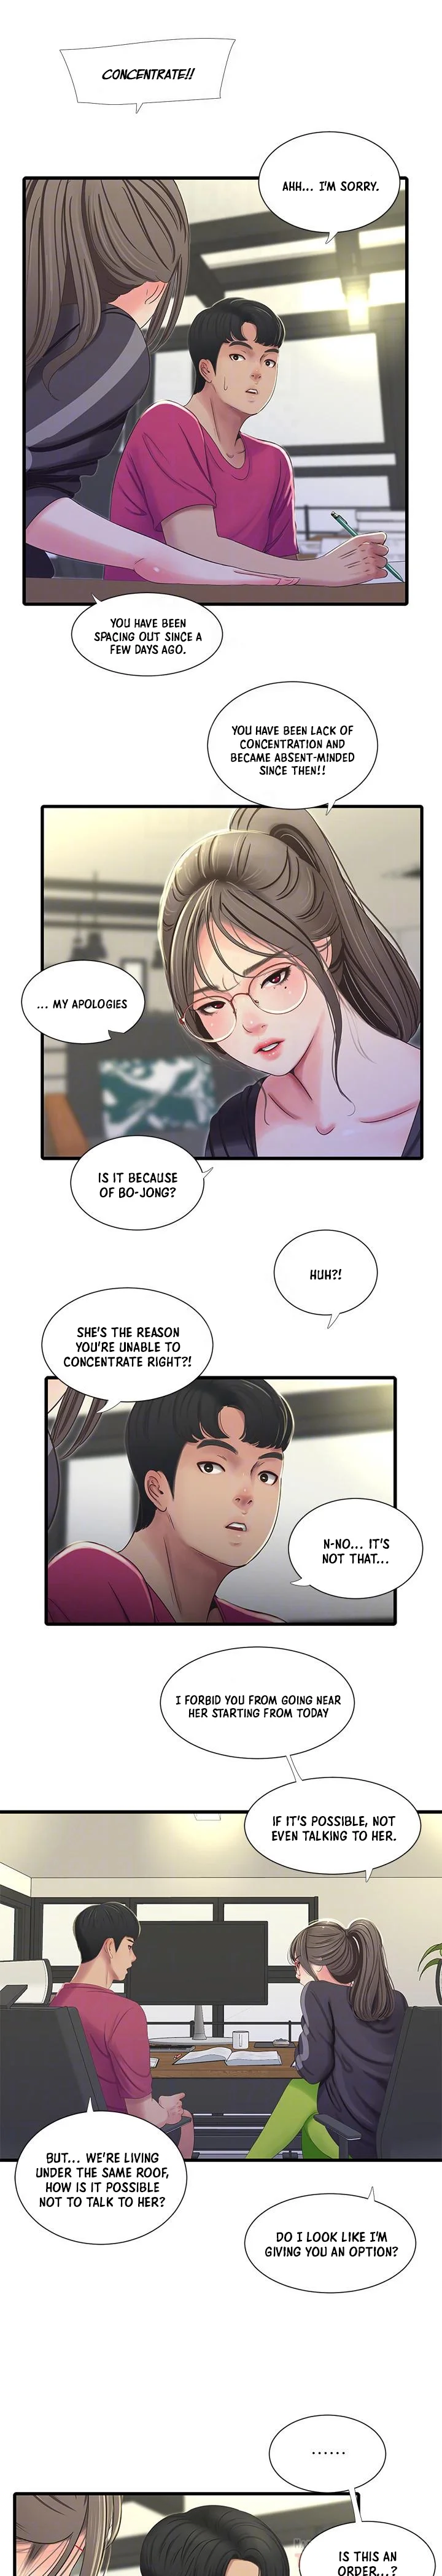 maidens-in-law-chap-38-8